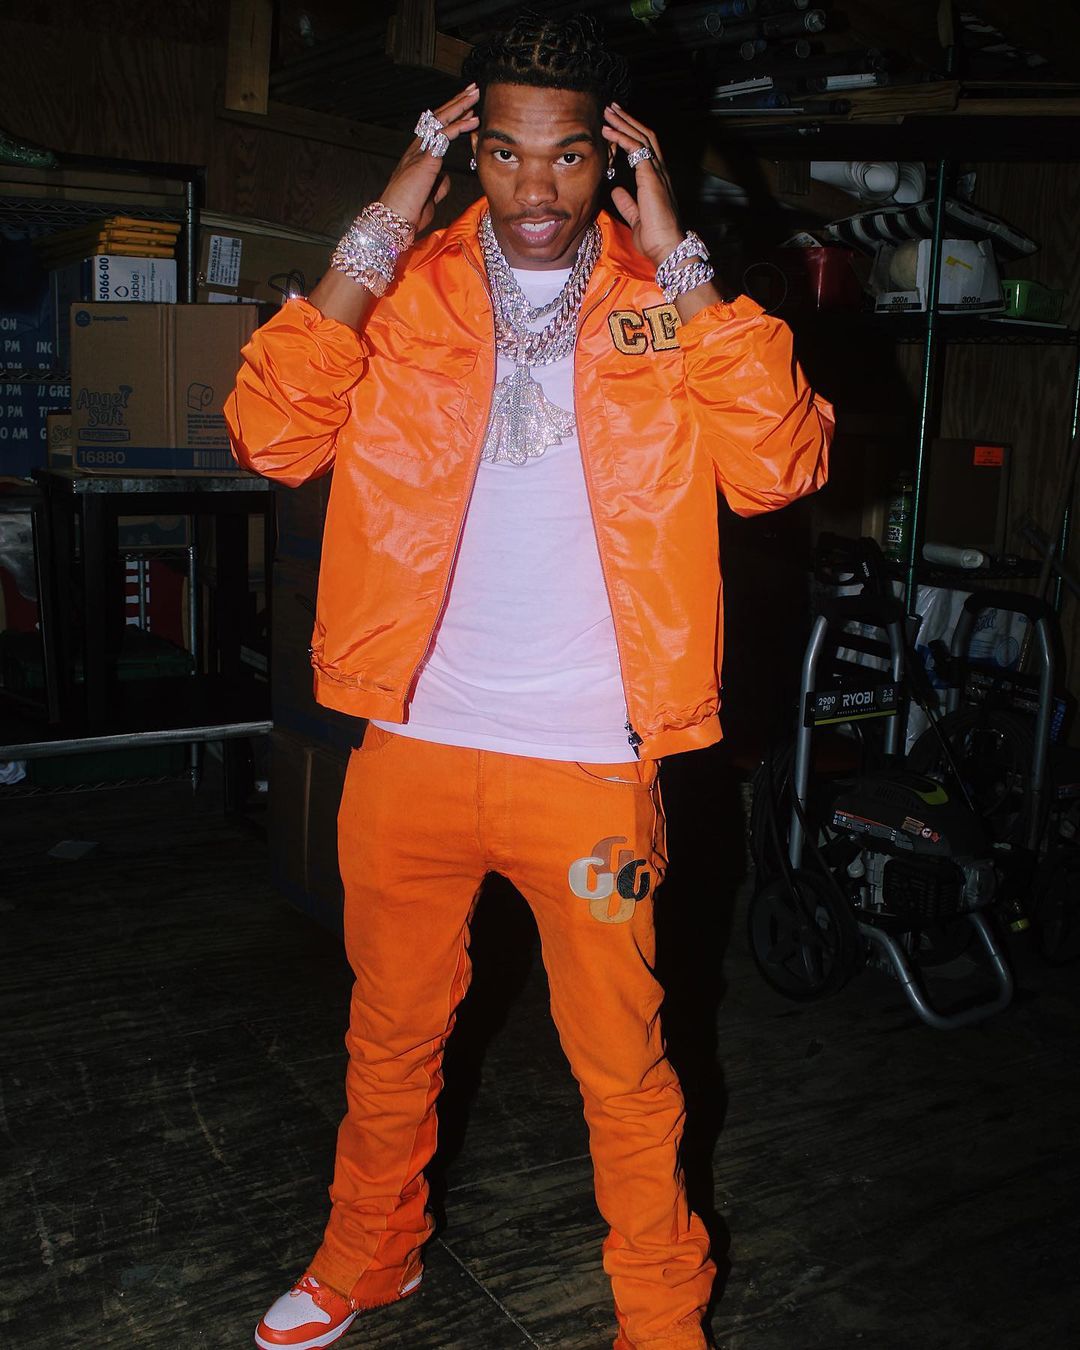 lil baby net worth and biography, height, wiki,age